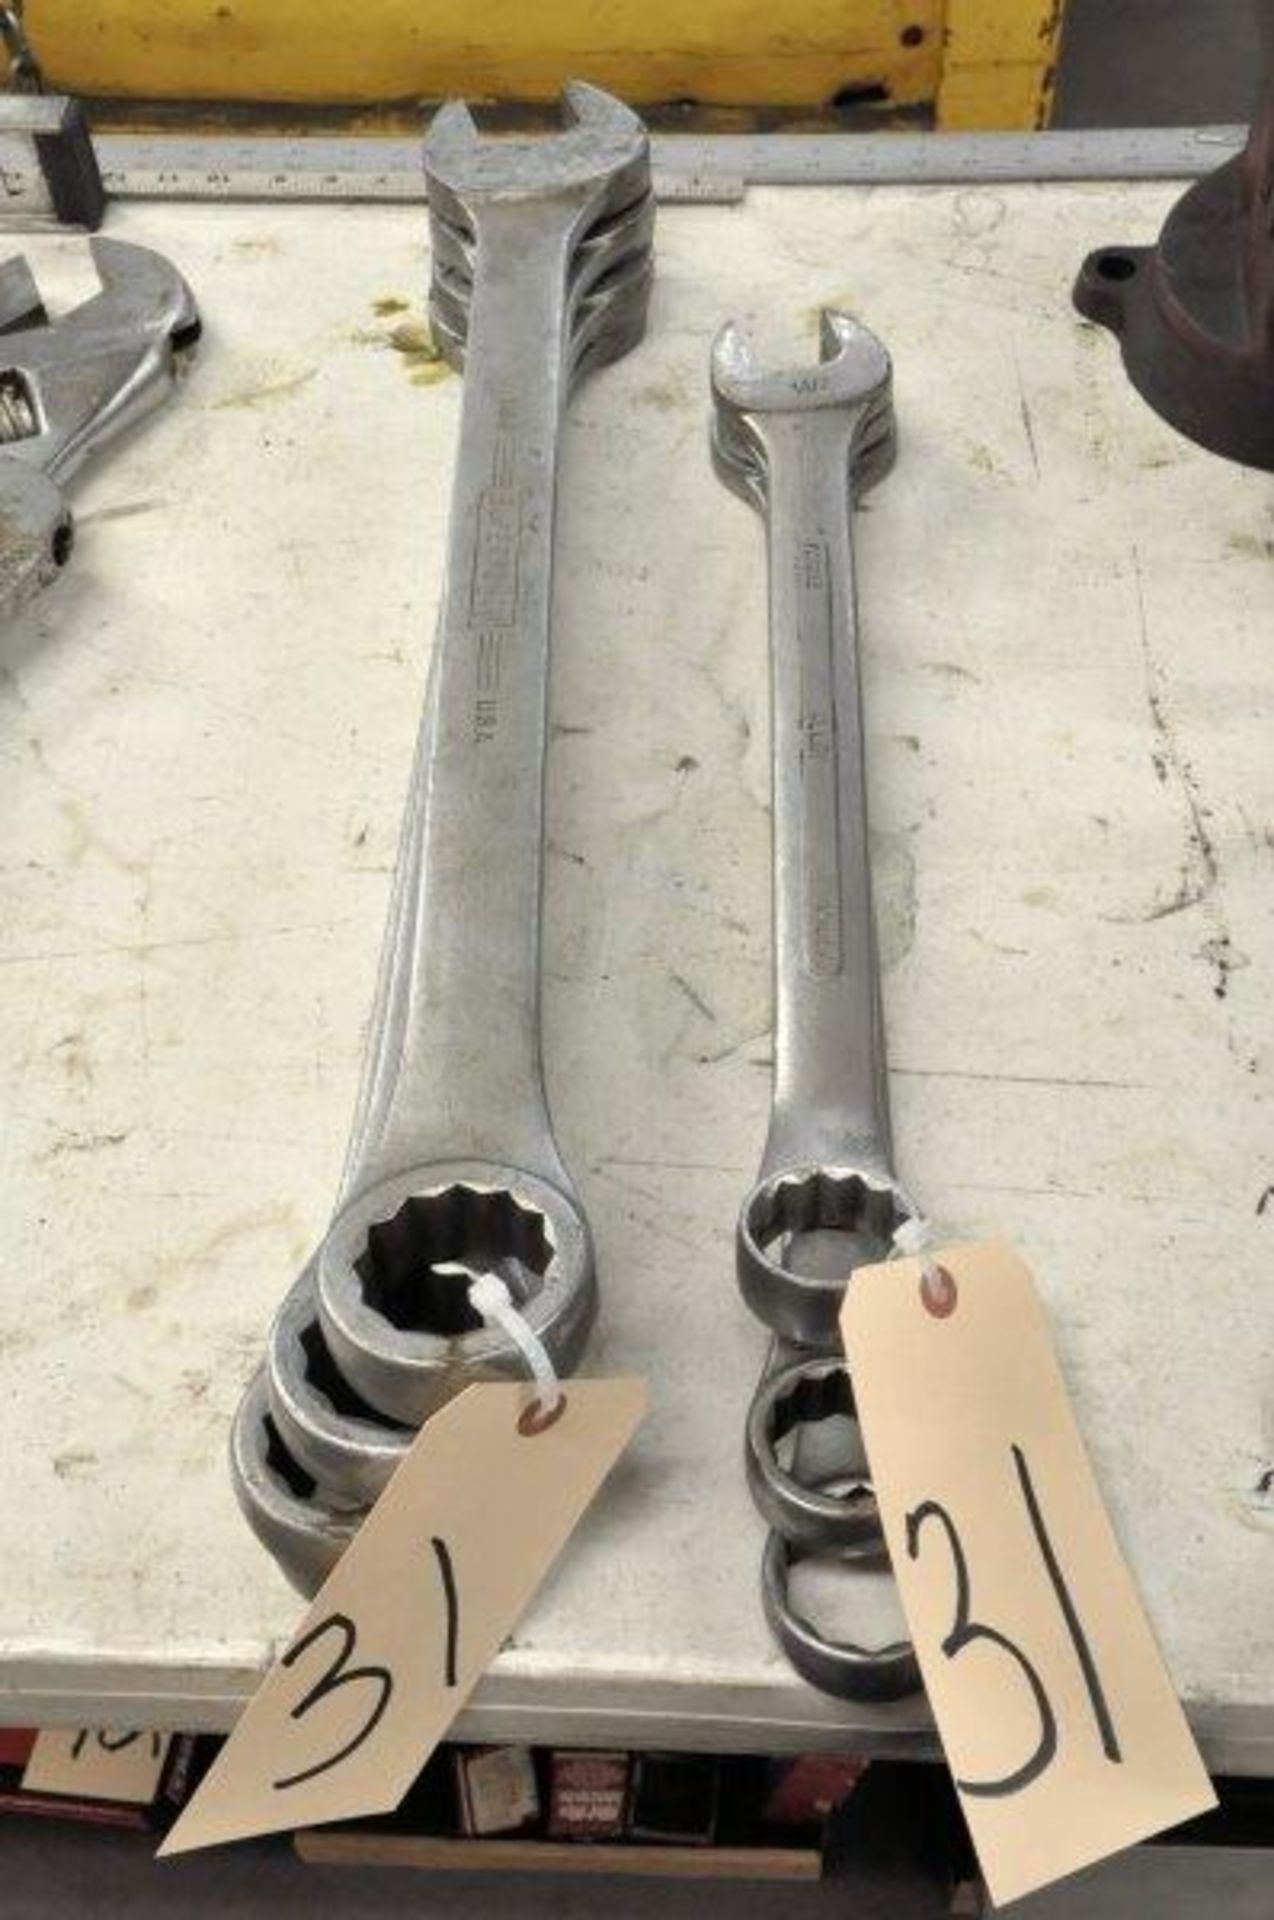 Lot-(7) Large Mechanics Wrenches, (Metal Fab Room) - Image 2 of 2